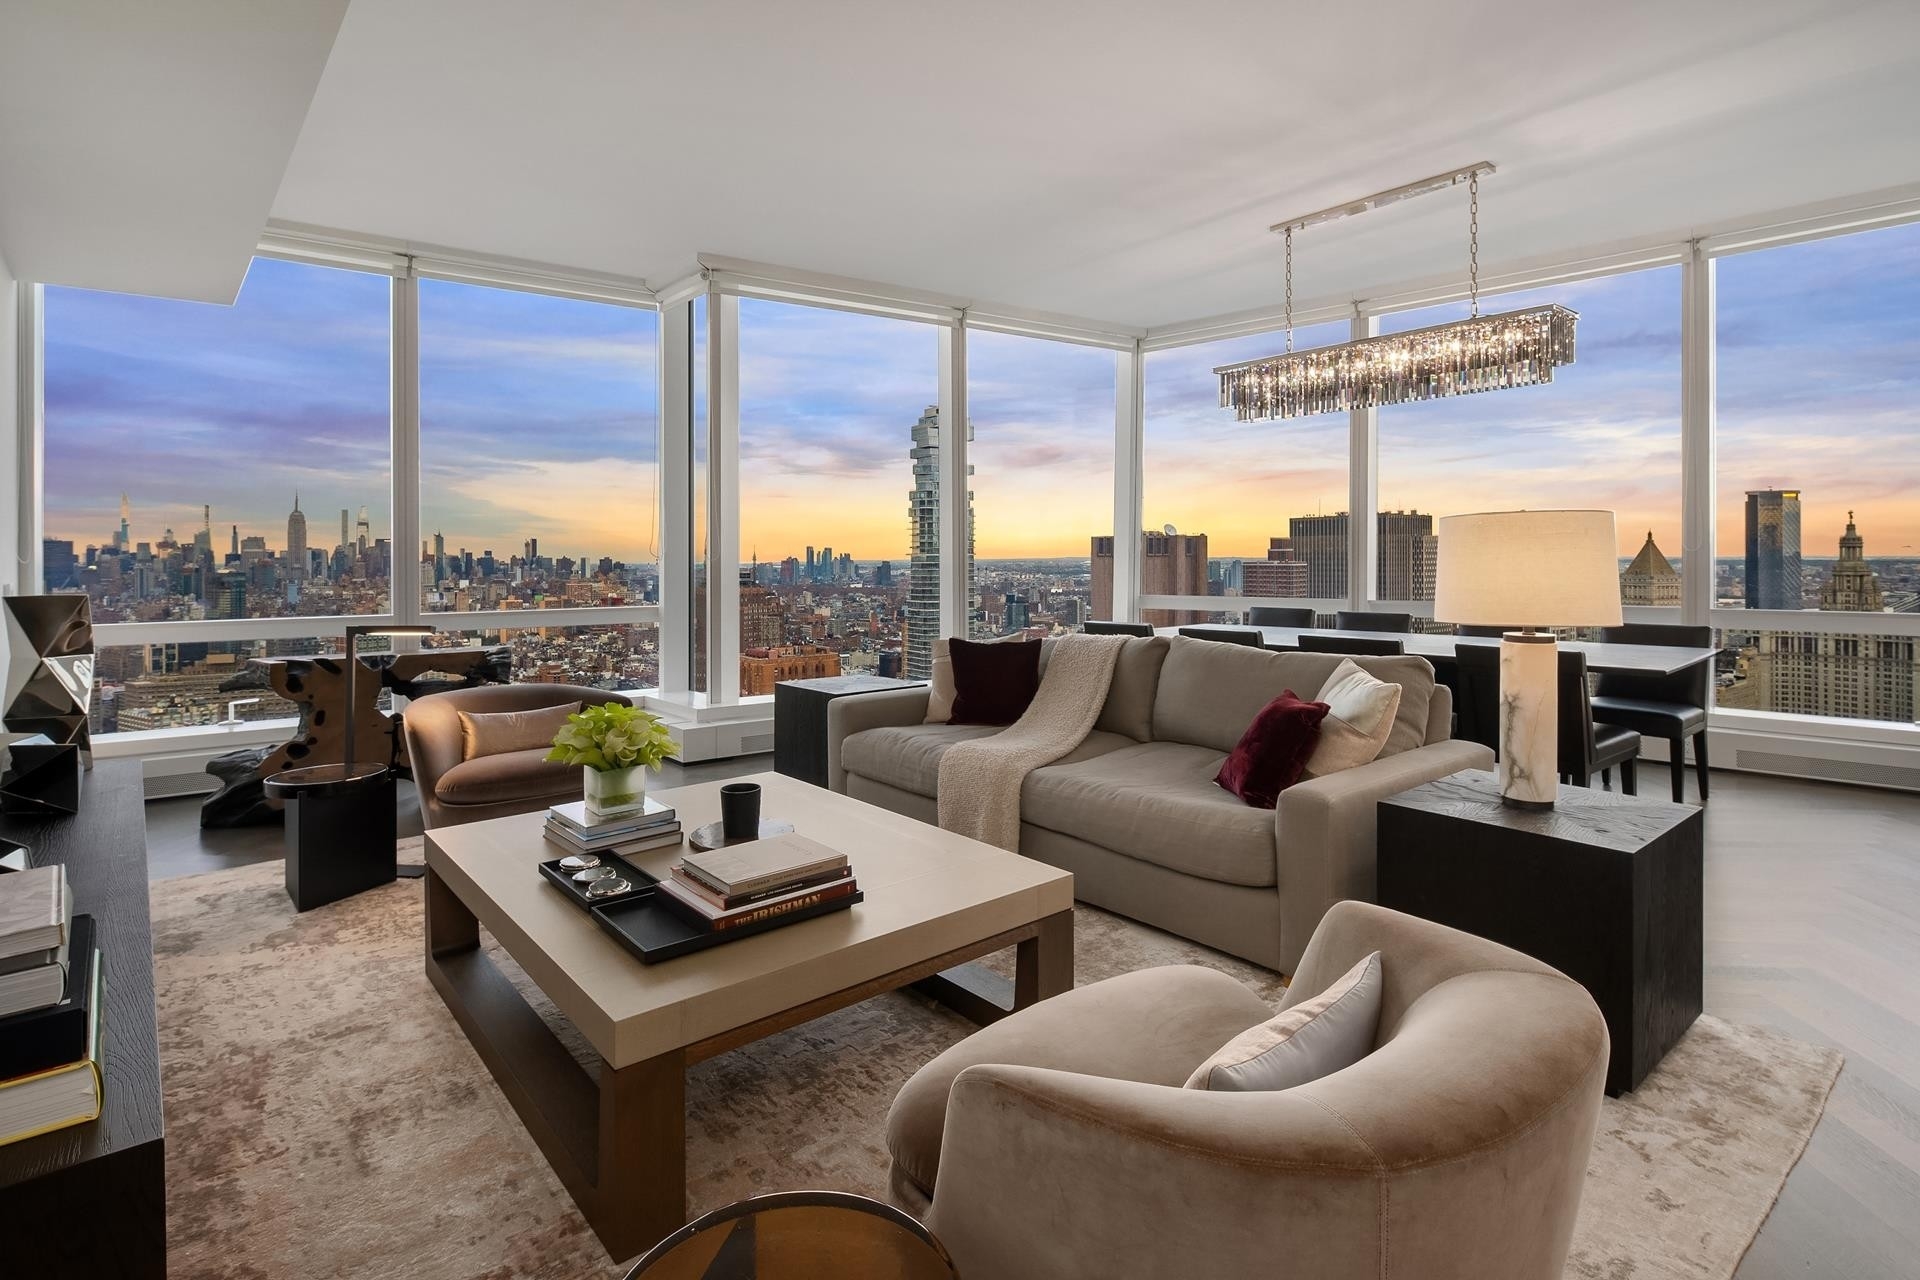 Condominium for Sale at One Eleven Murray Street, 111 MURRAY ST, 48EAST TriBeCa, New York, NY 10007